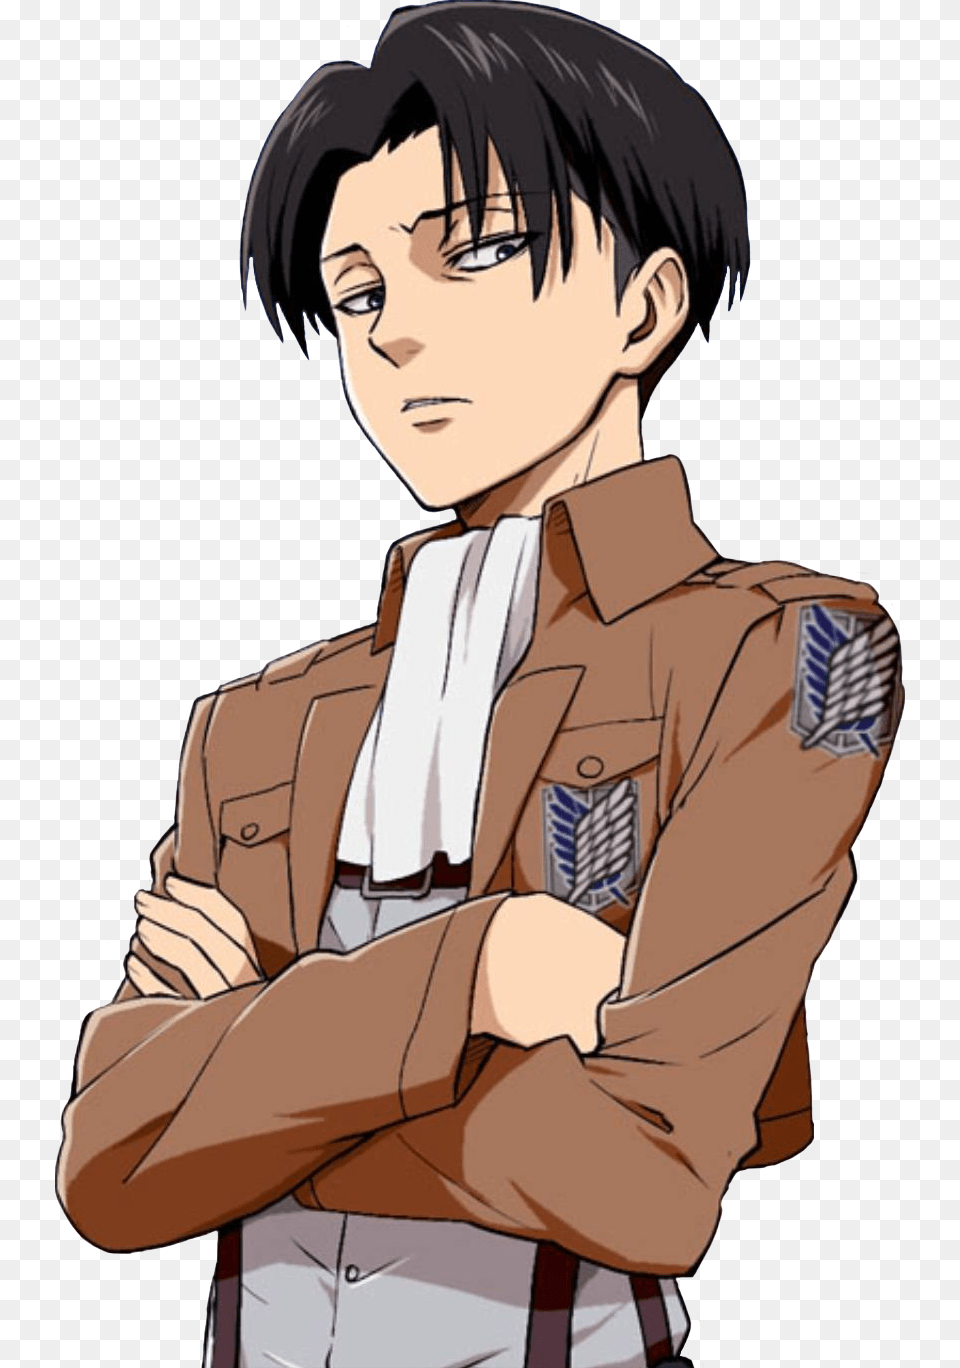 Pin By Oompachan On Aot Levi Ackerman, Publication, Book, Comics, Person Png Image